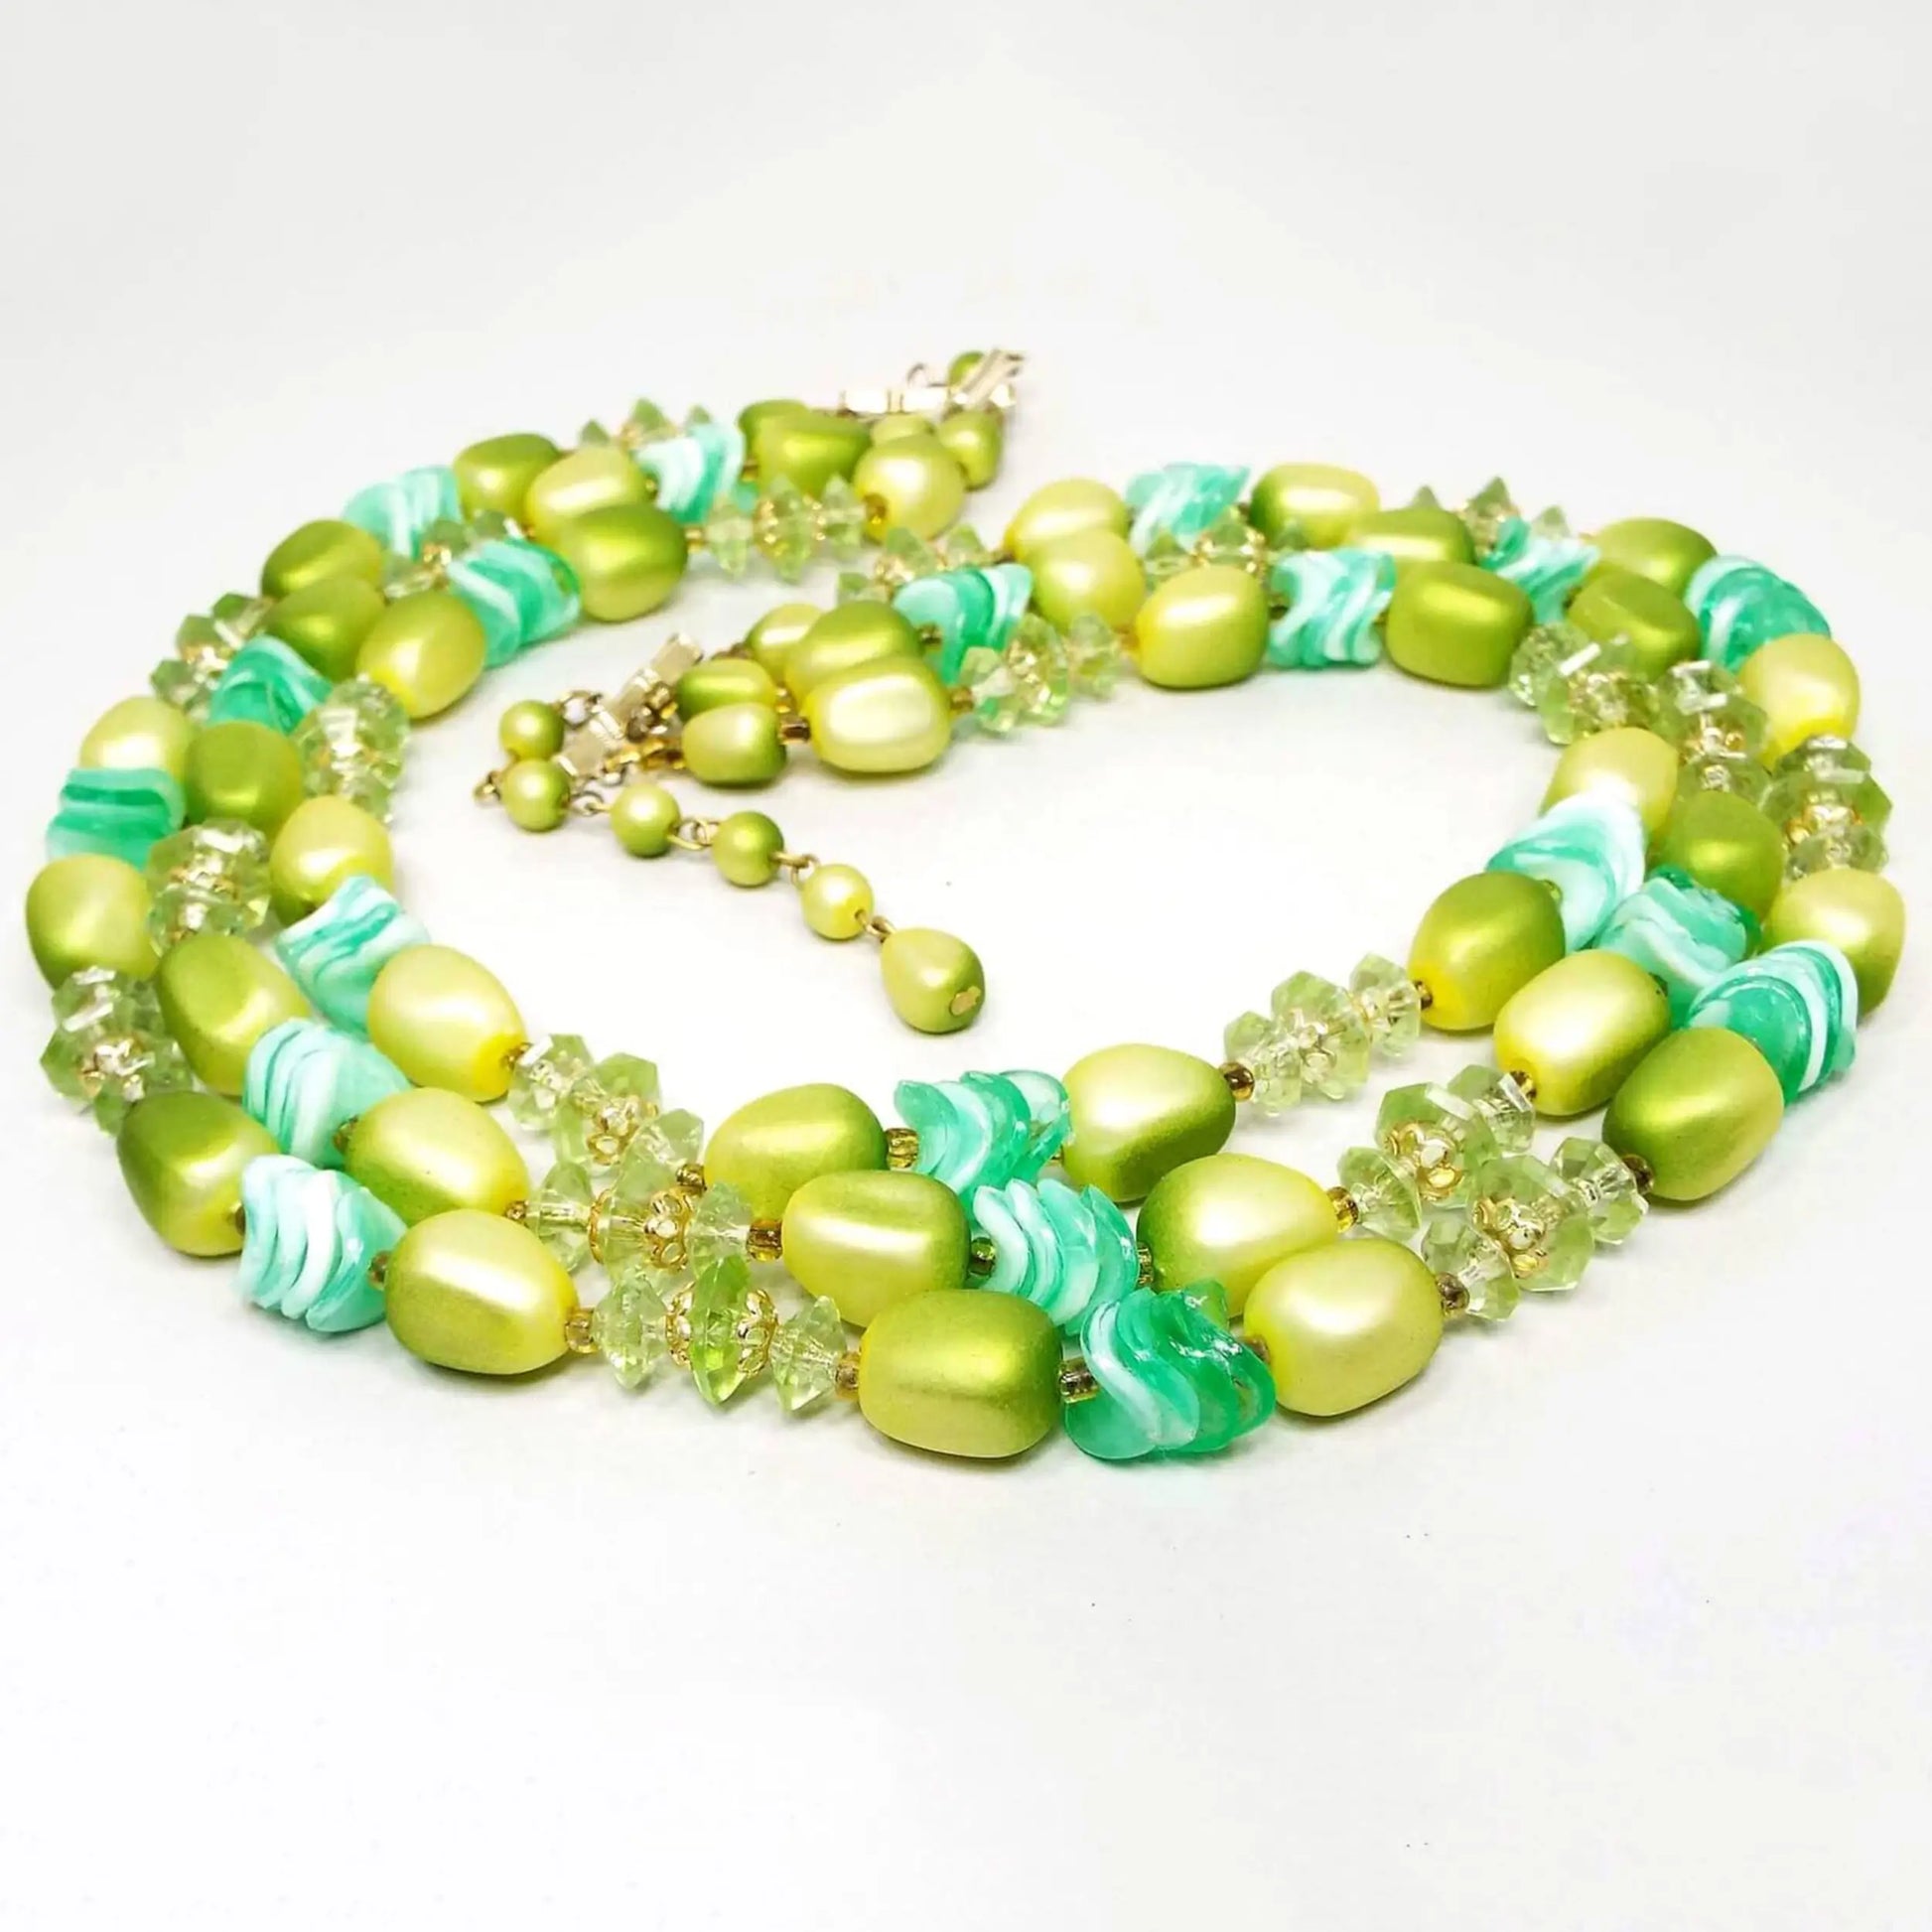 The Mid Century vintage beaded multi strand necklace from Hong Kong. It has three strands of plastic beads in varying shades of bright to medium green. It has a fairly chunky appearance with disc, saucer, nugget, and round shaped beads.